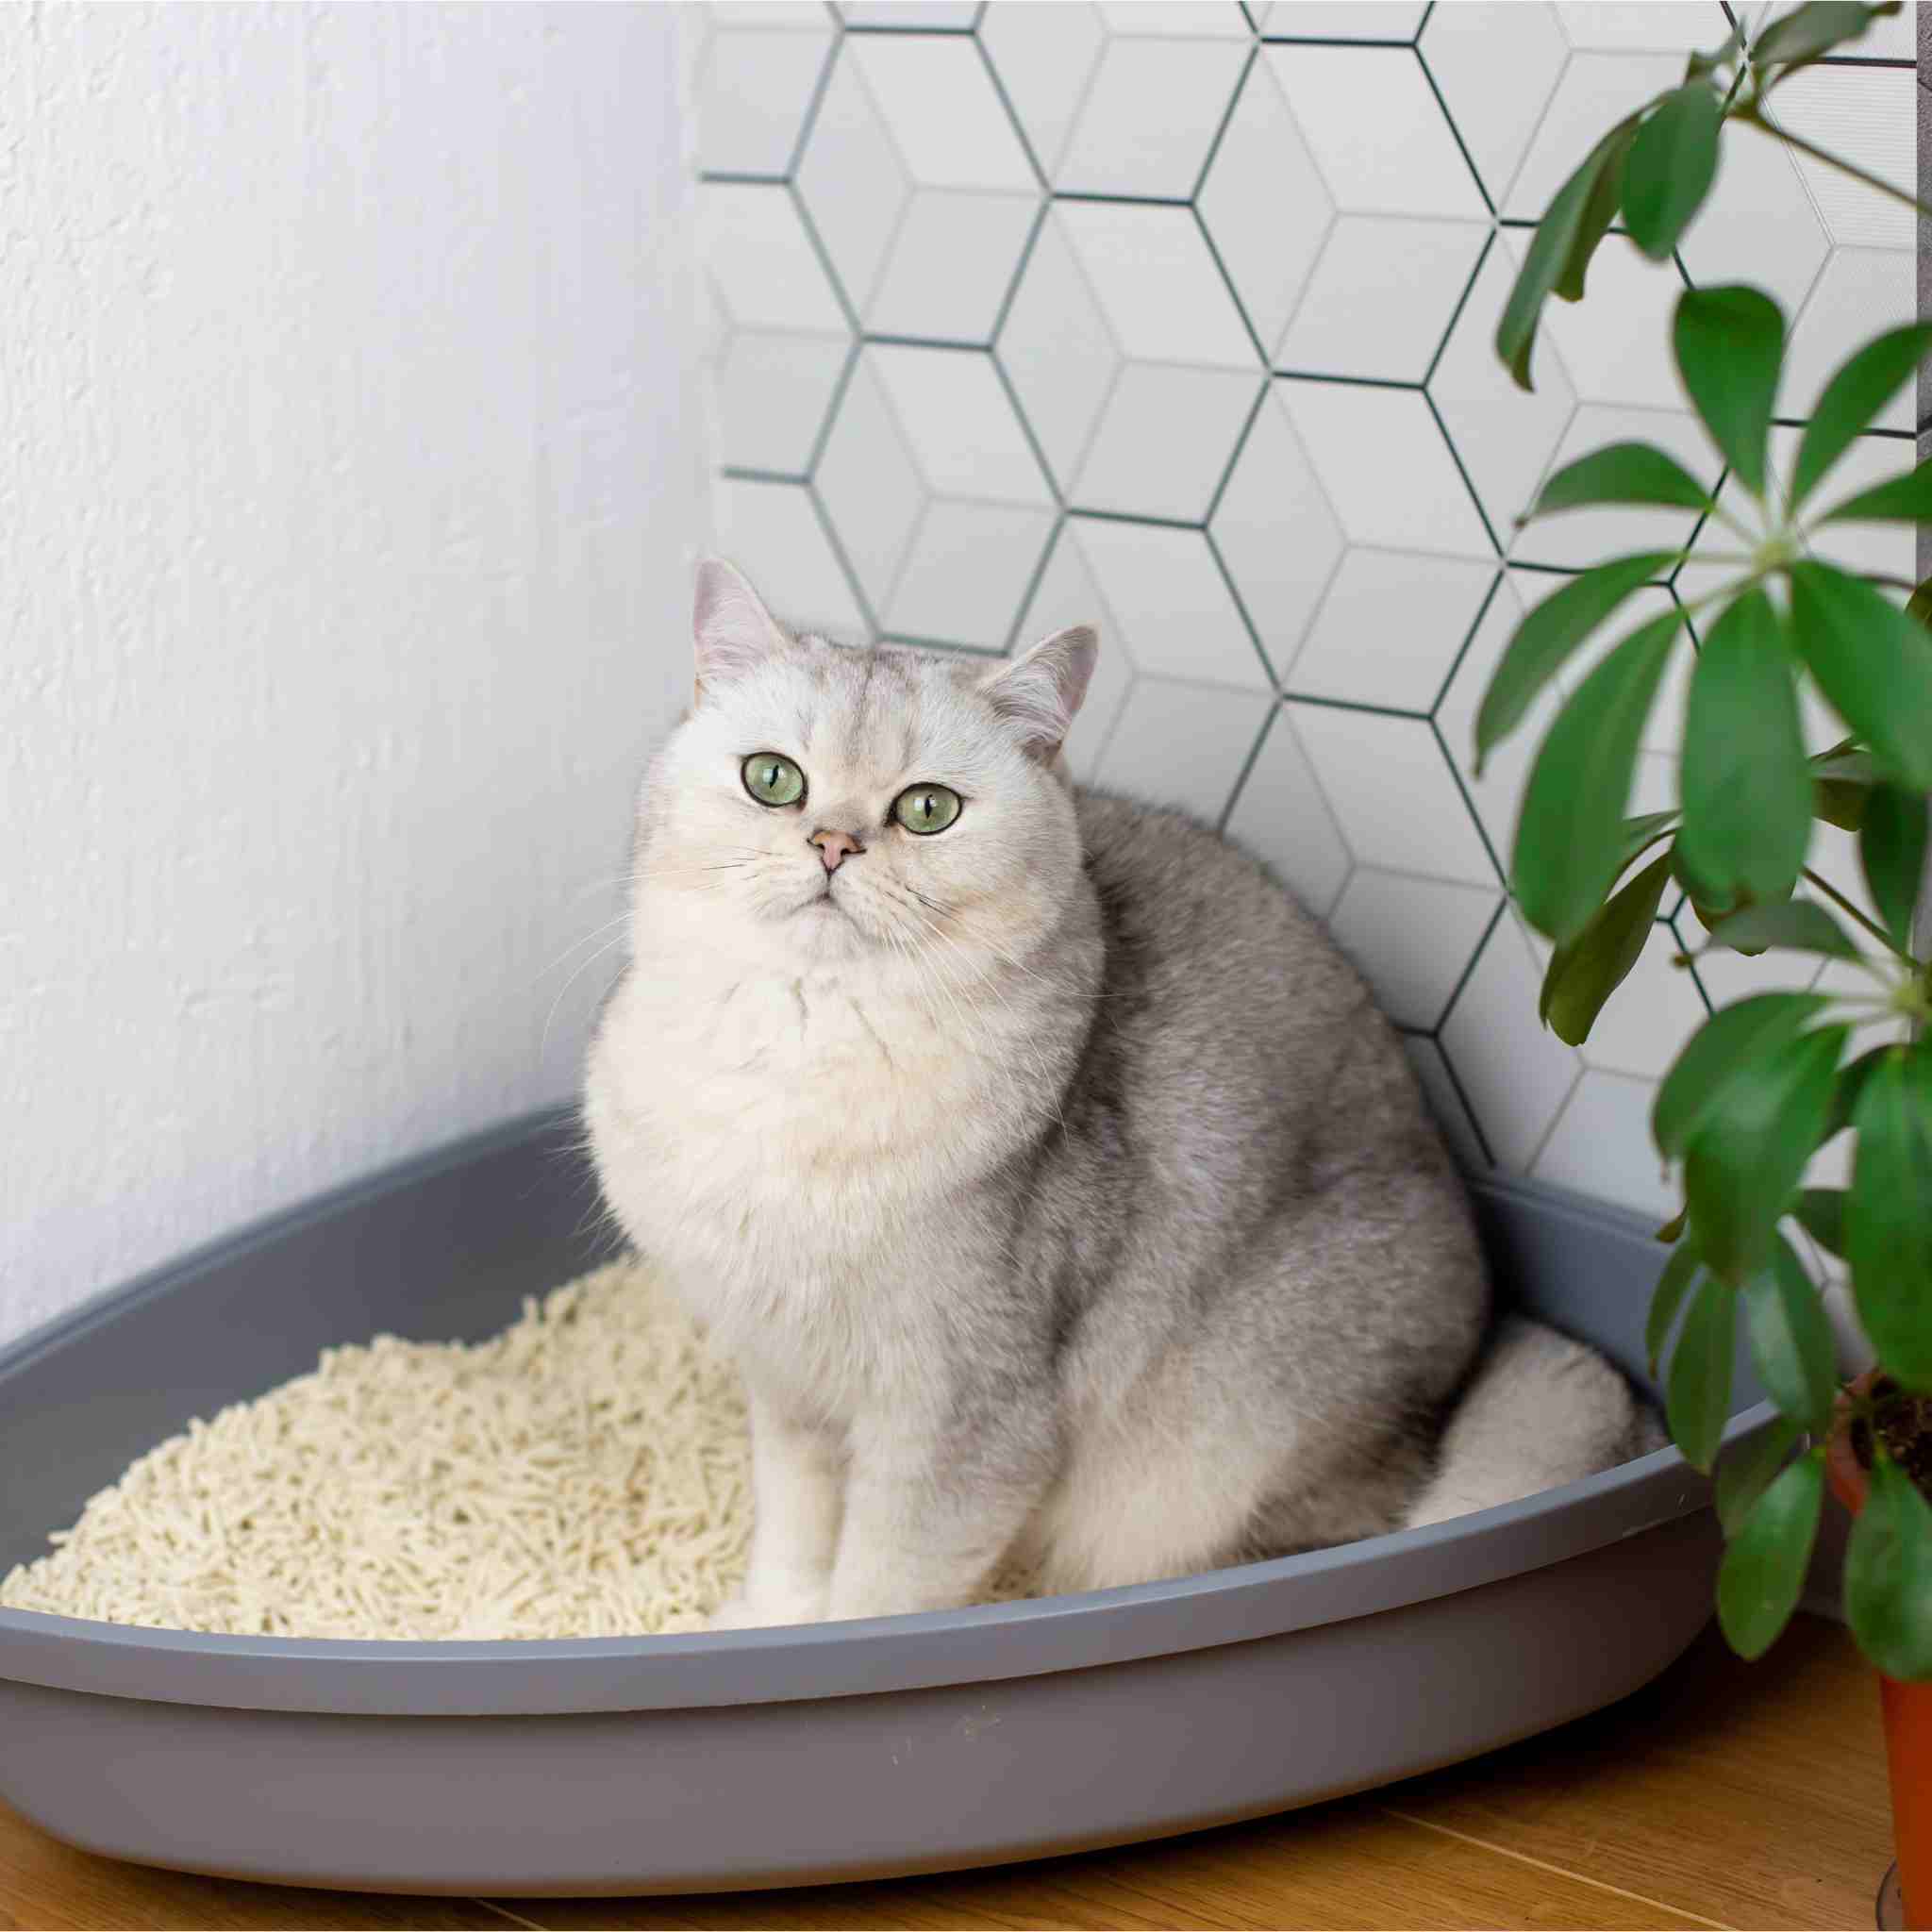 Adult cat sitting in a litter box with SoyKitty’s eco-friendly, unscented cat litter with a plant in the background